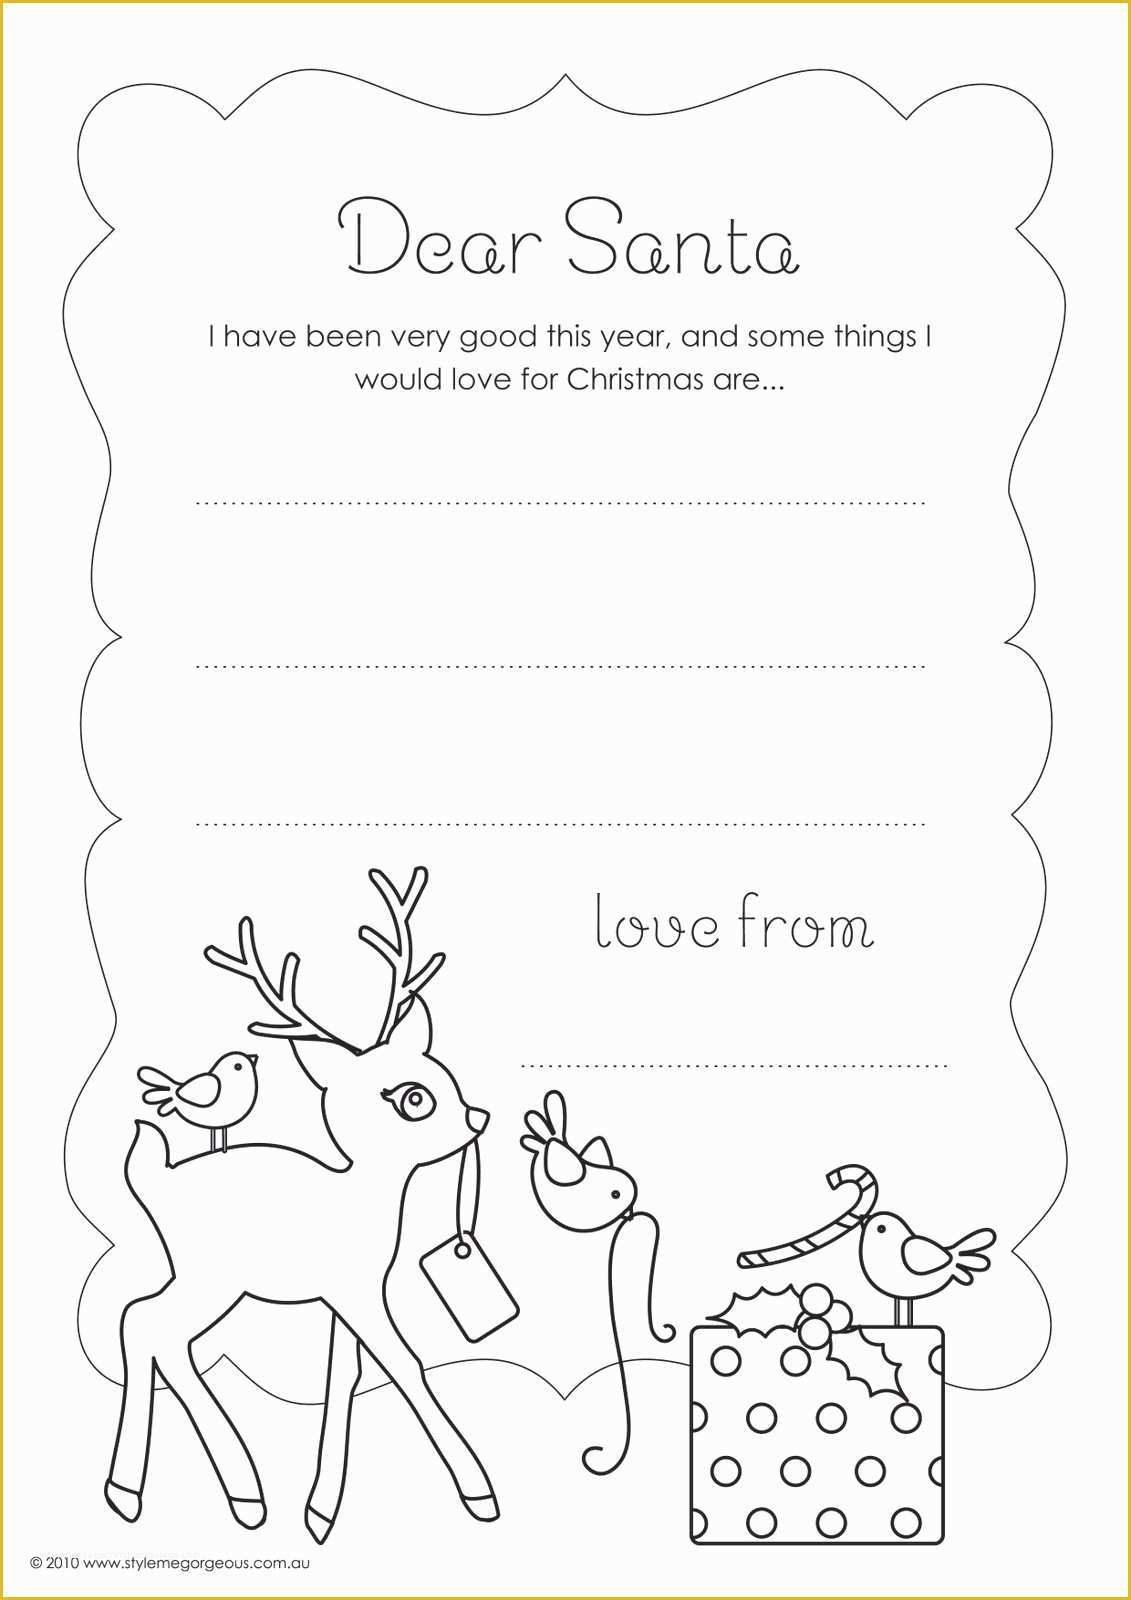 Letter to Santa Template Free Printable Of Santa Letter Coloring Page thekindproject